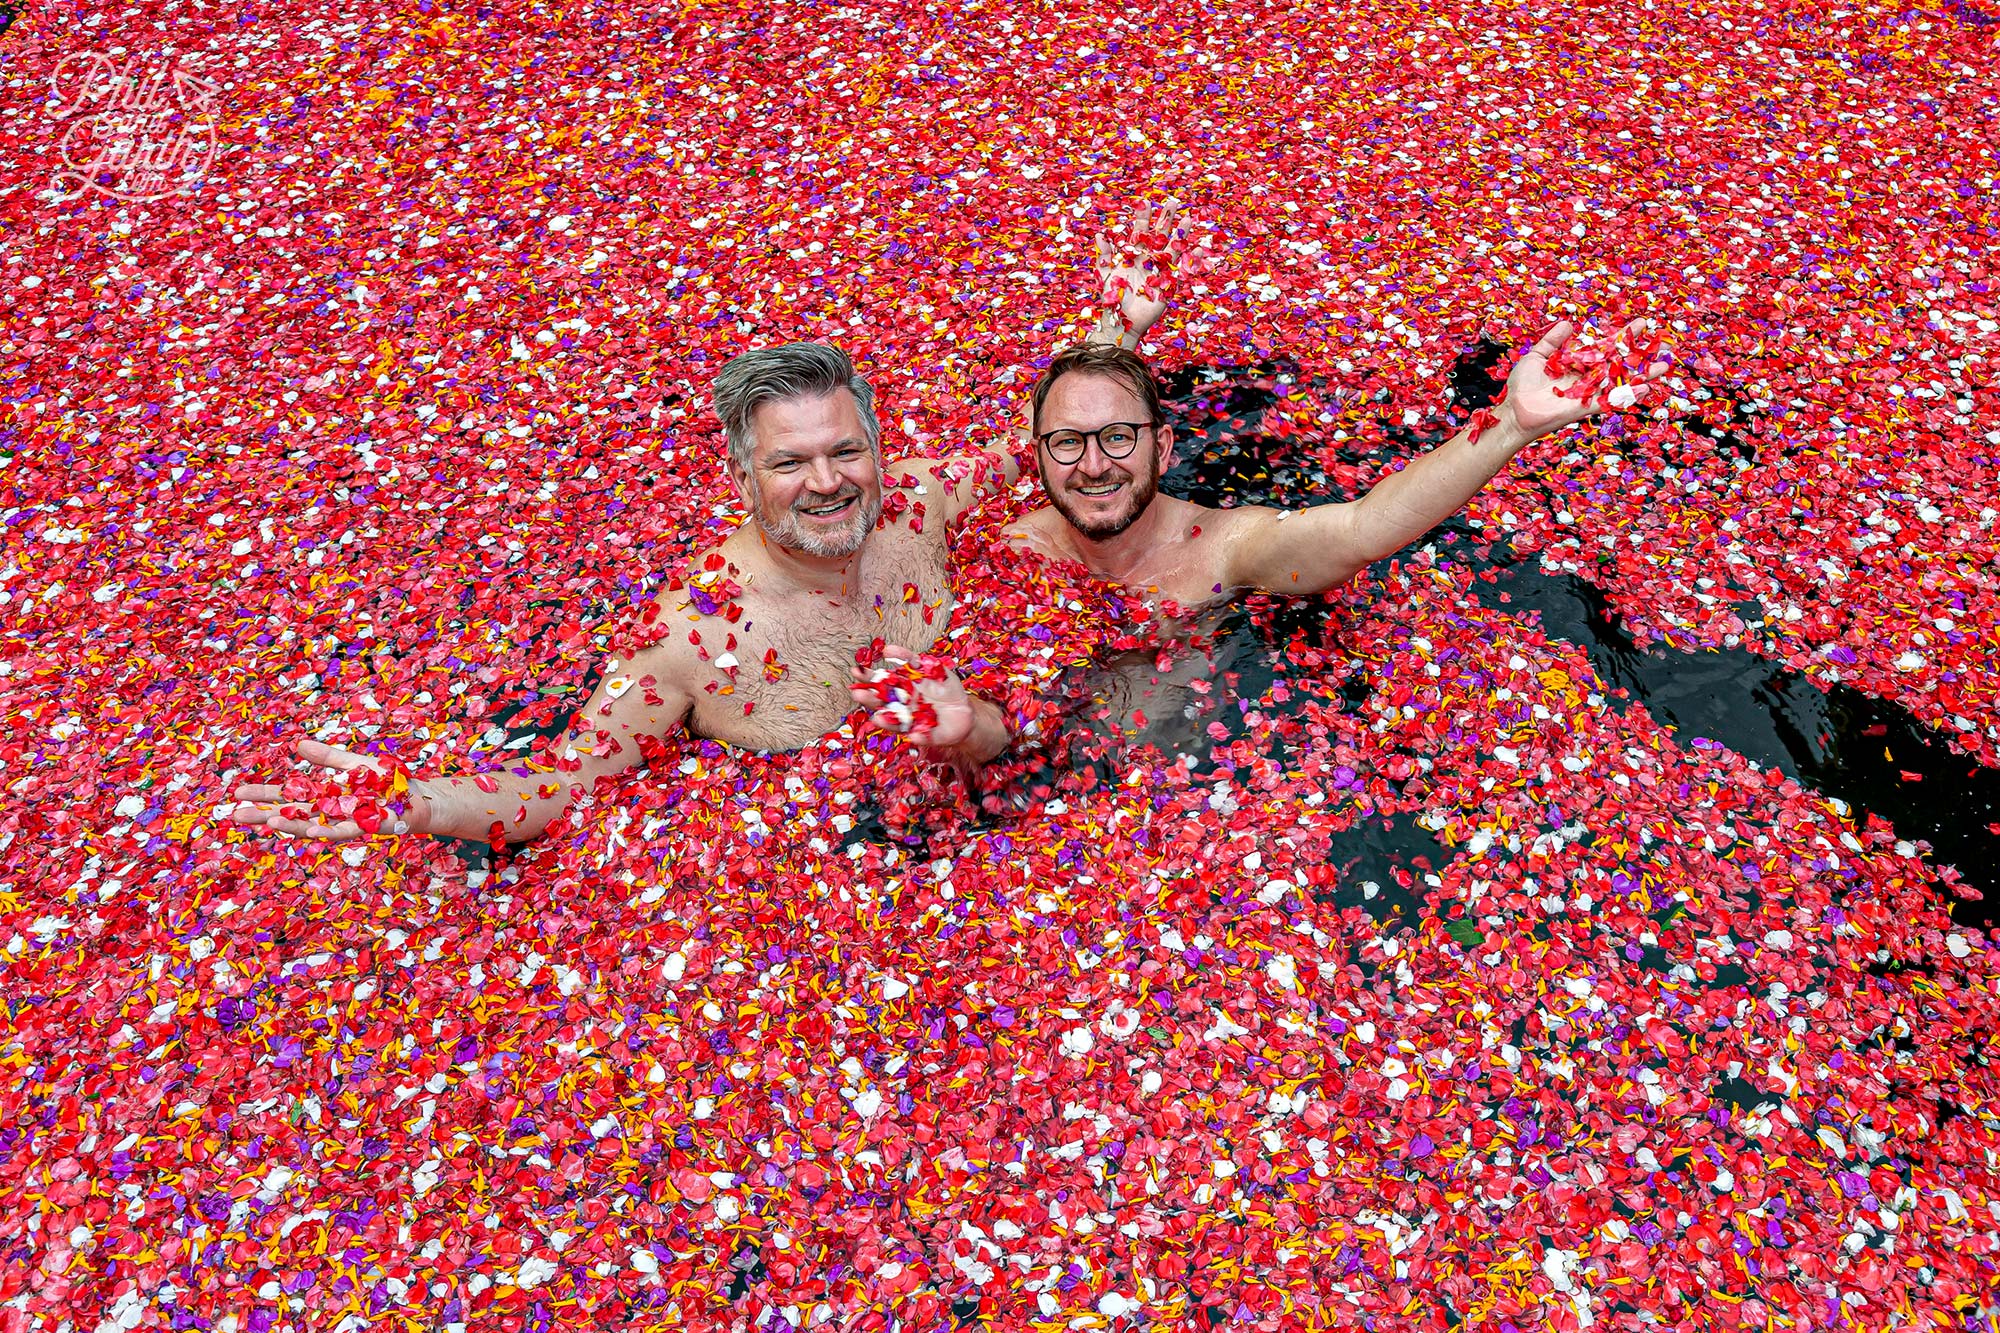 Just like a pool of confetti when the petals are all mixed up